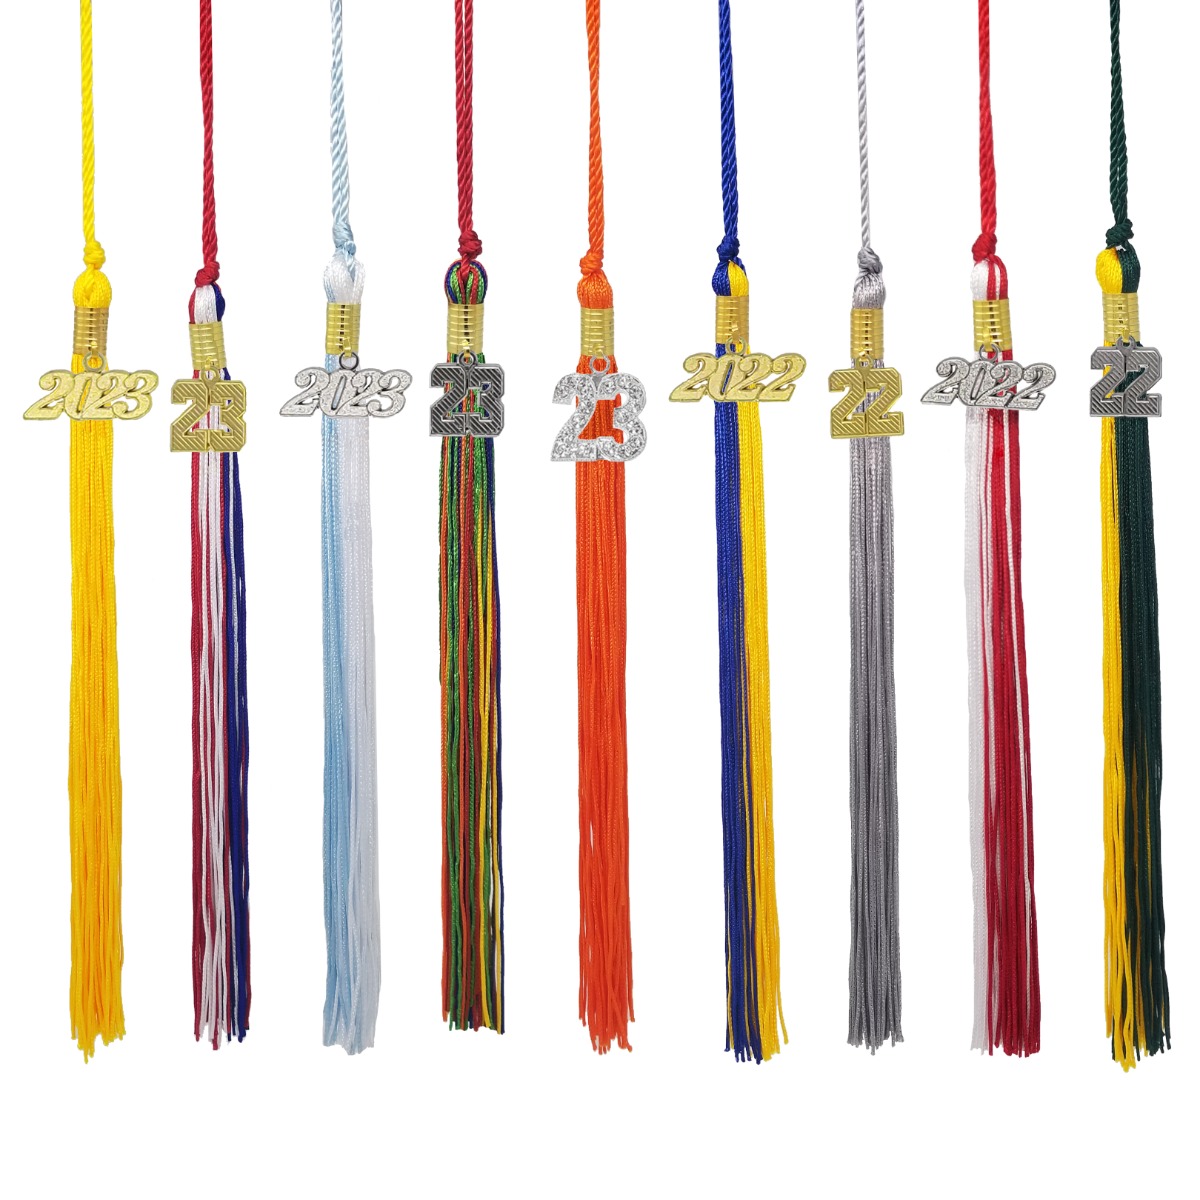 Solid or Multi-Color Graduation Tassel with Year Charm